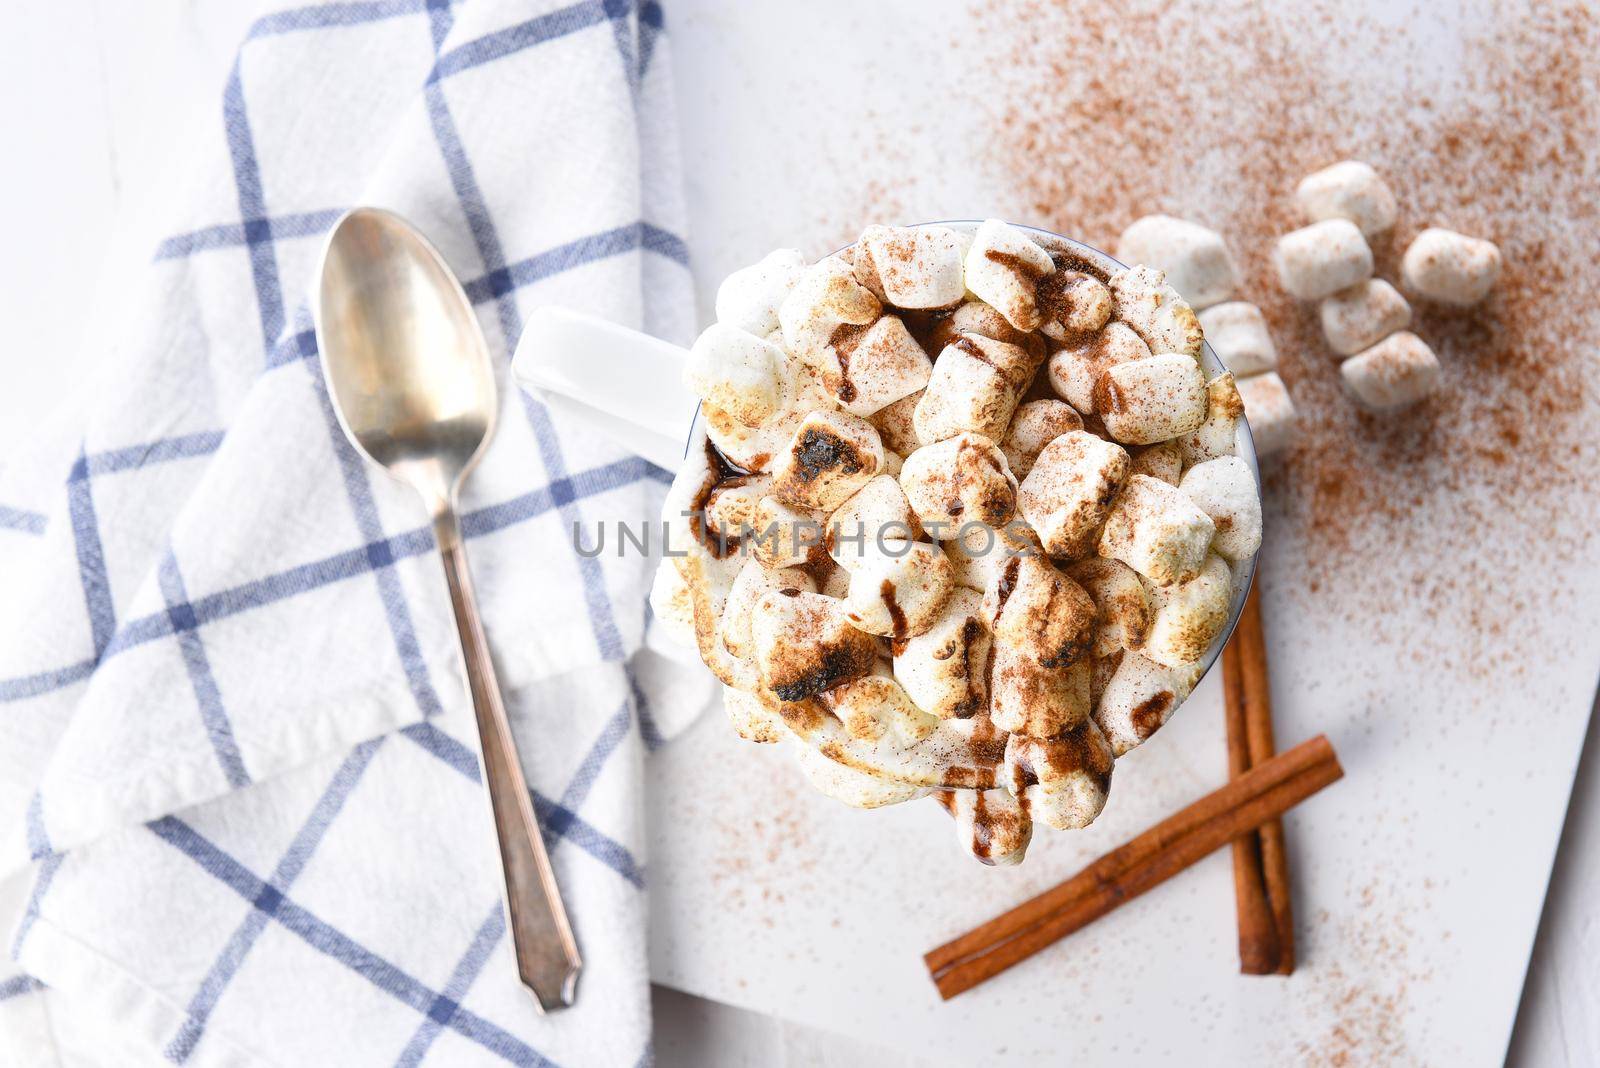 Overhead view of a mug of hot chocolate with toasted marshmallows sprinkled with cinnamon. A spoon towel and cinnamon sticks 